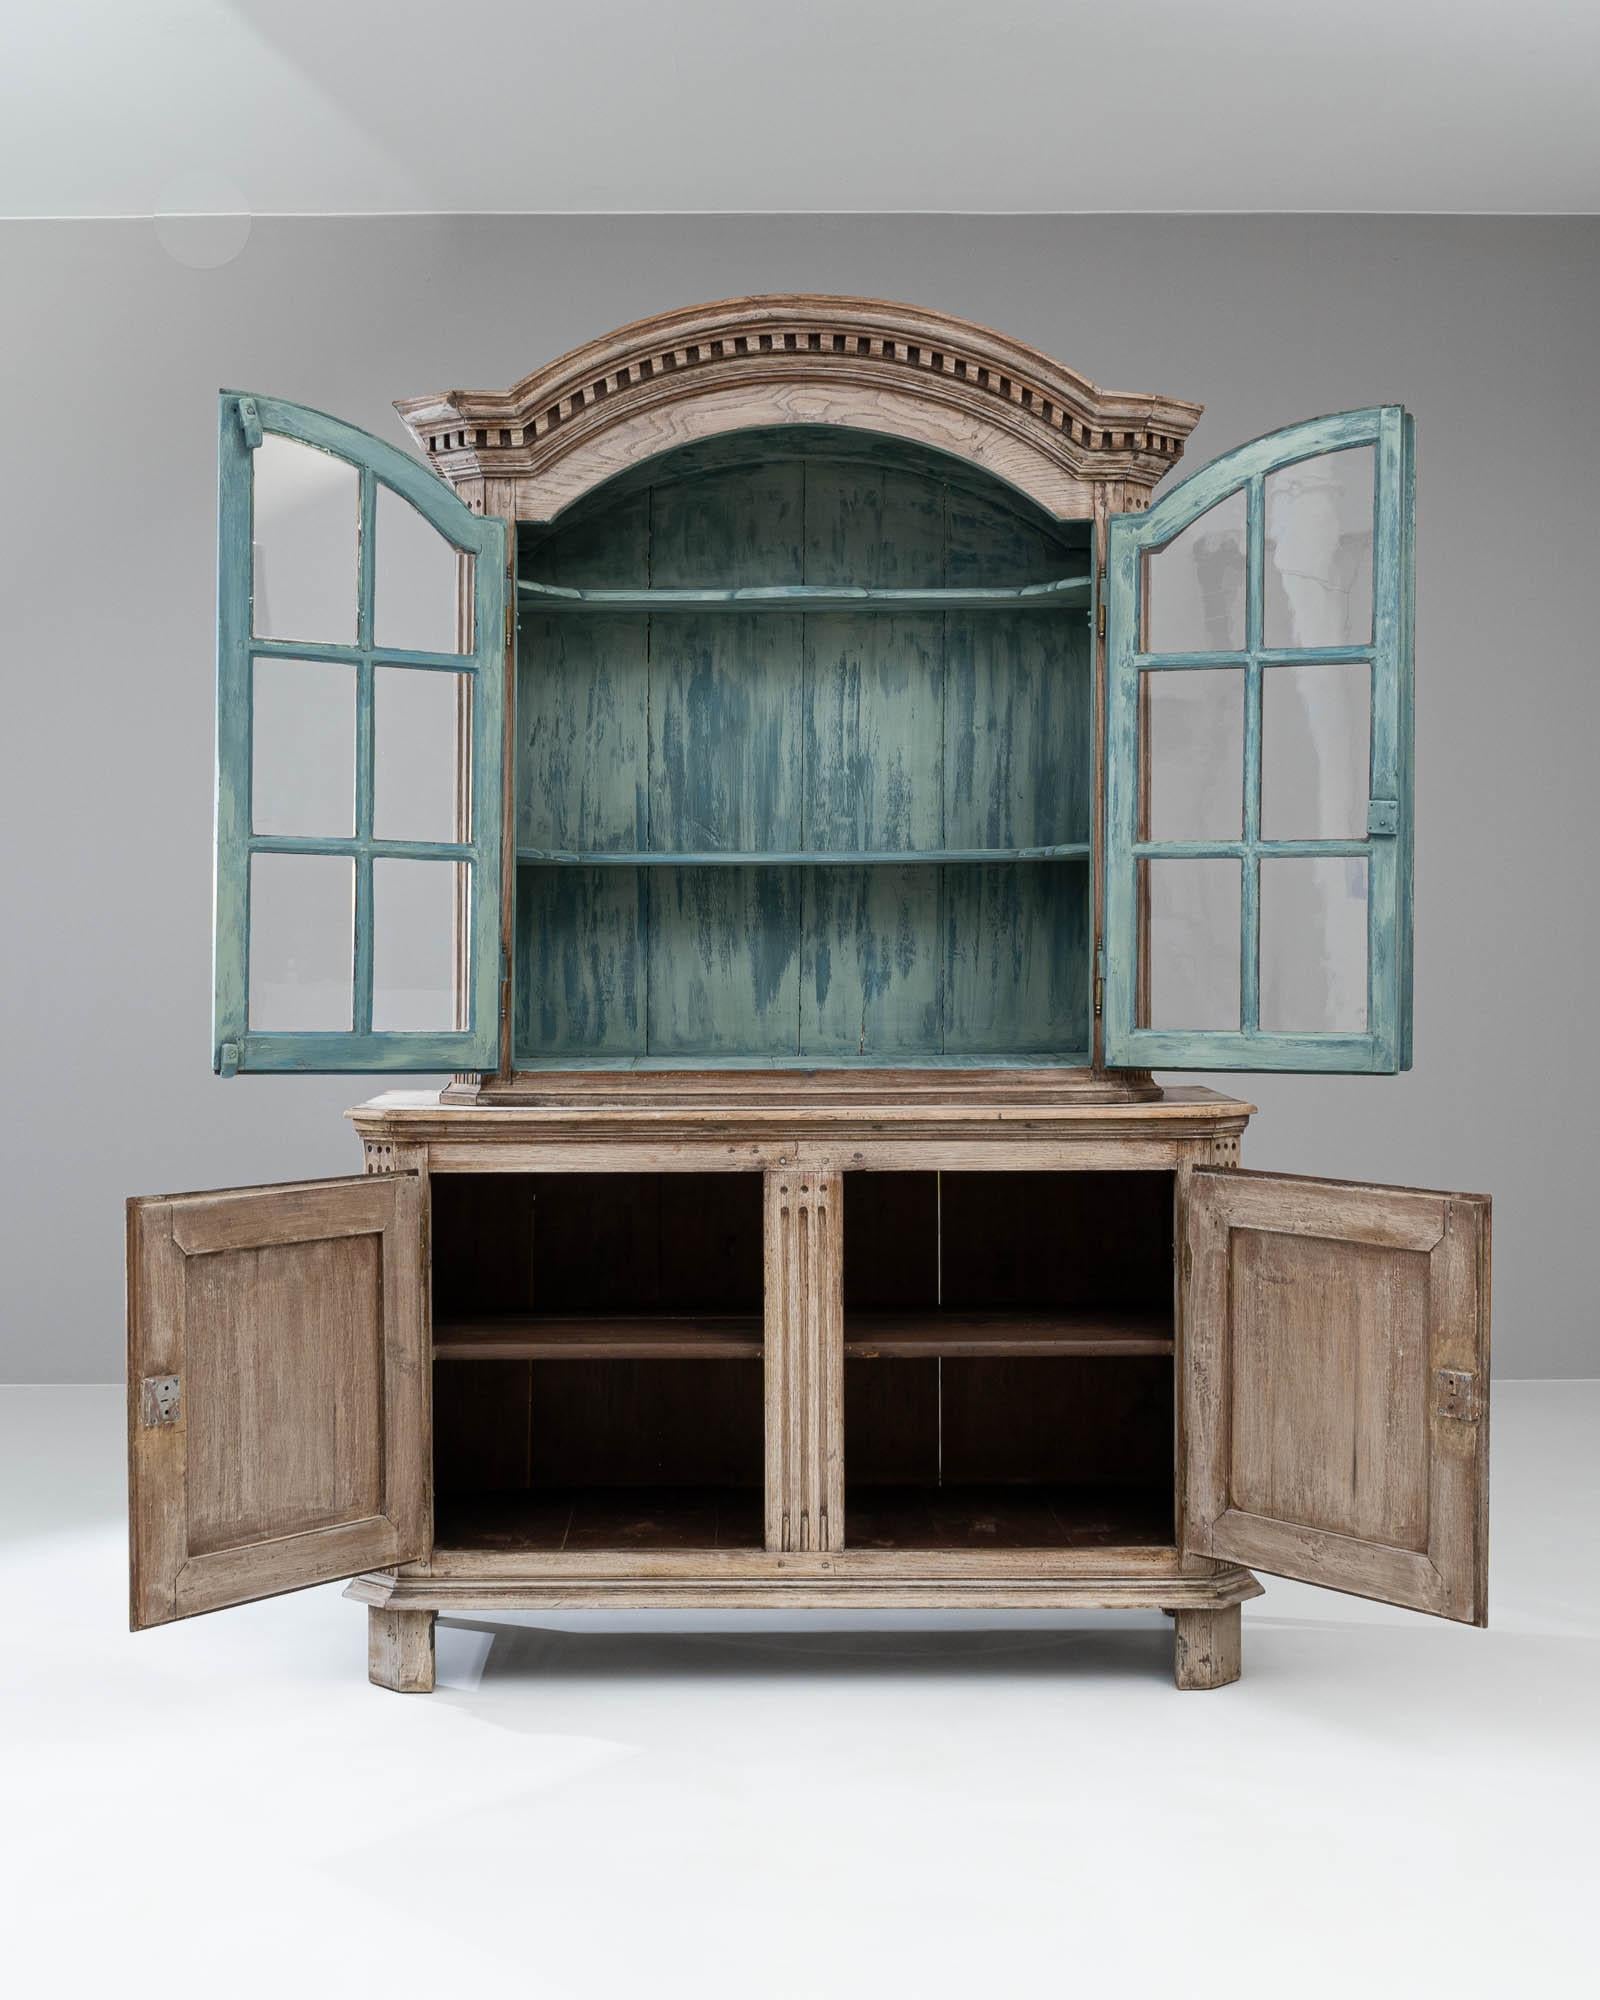 This grand 19th Century French Wooden Vitrine, with its stately presence and aged grace, stands as a testament to the timeless elegance of antique furniture. The cabinet's bleached wood façade is adorned with subtle carved details that reveal its